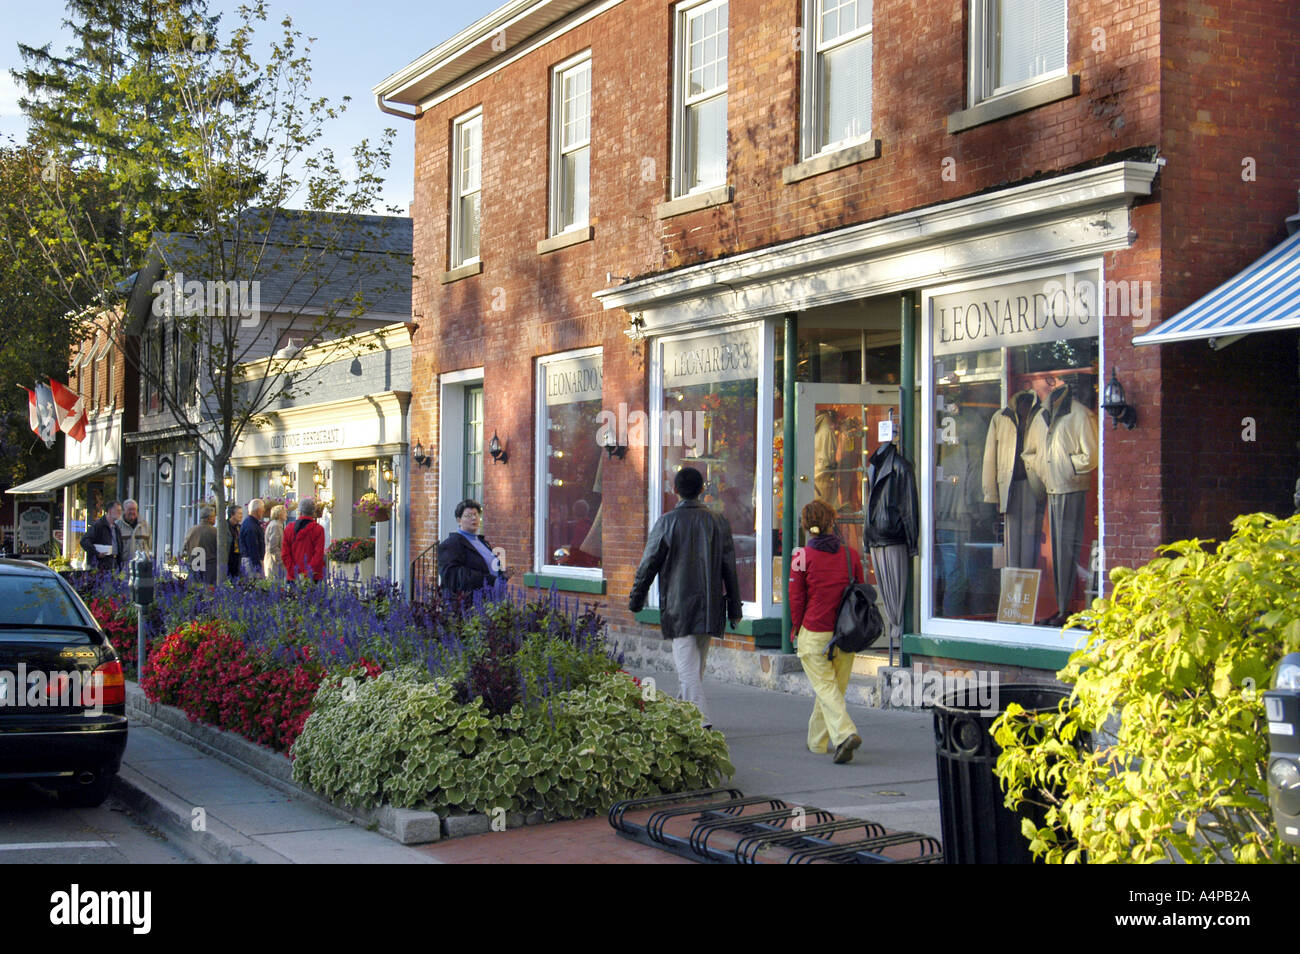 Street scenes of the quaint shopping district of Niagara on the Lake Ontario Canada Stock Photo